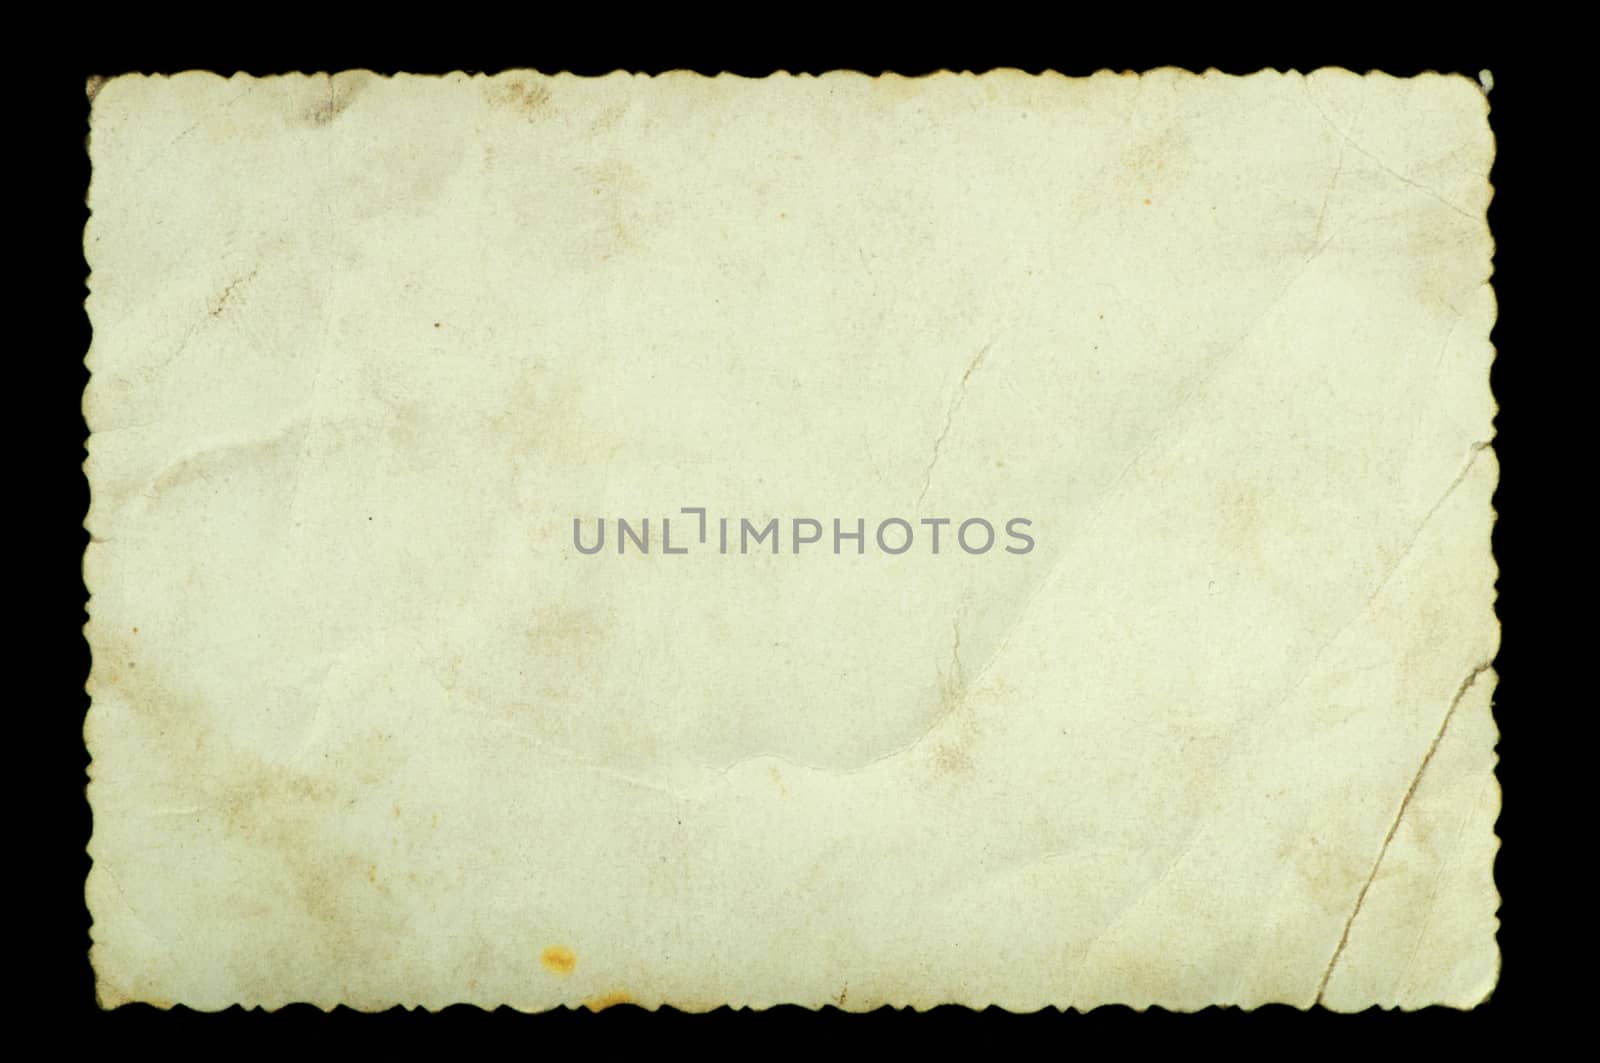 old paper sheet black isolated